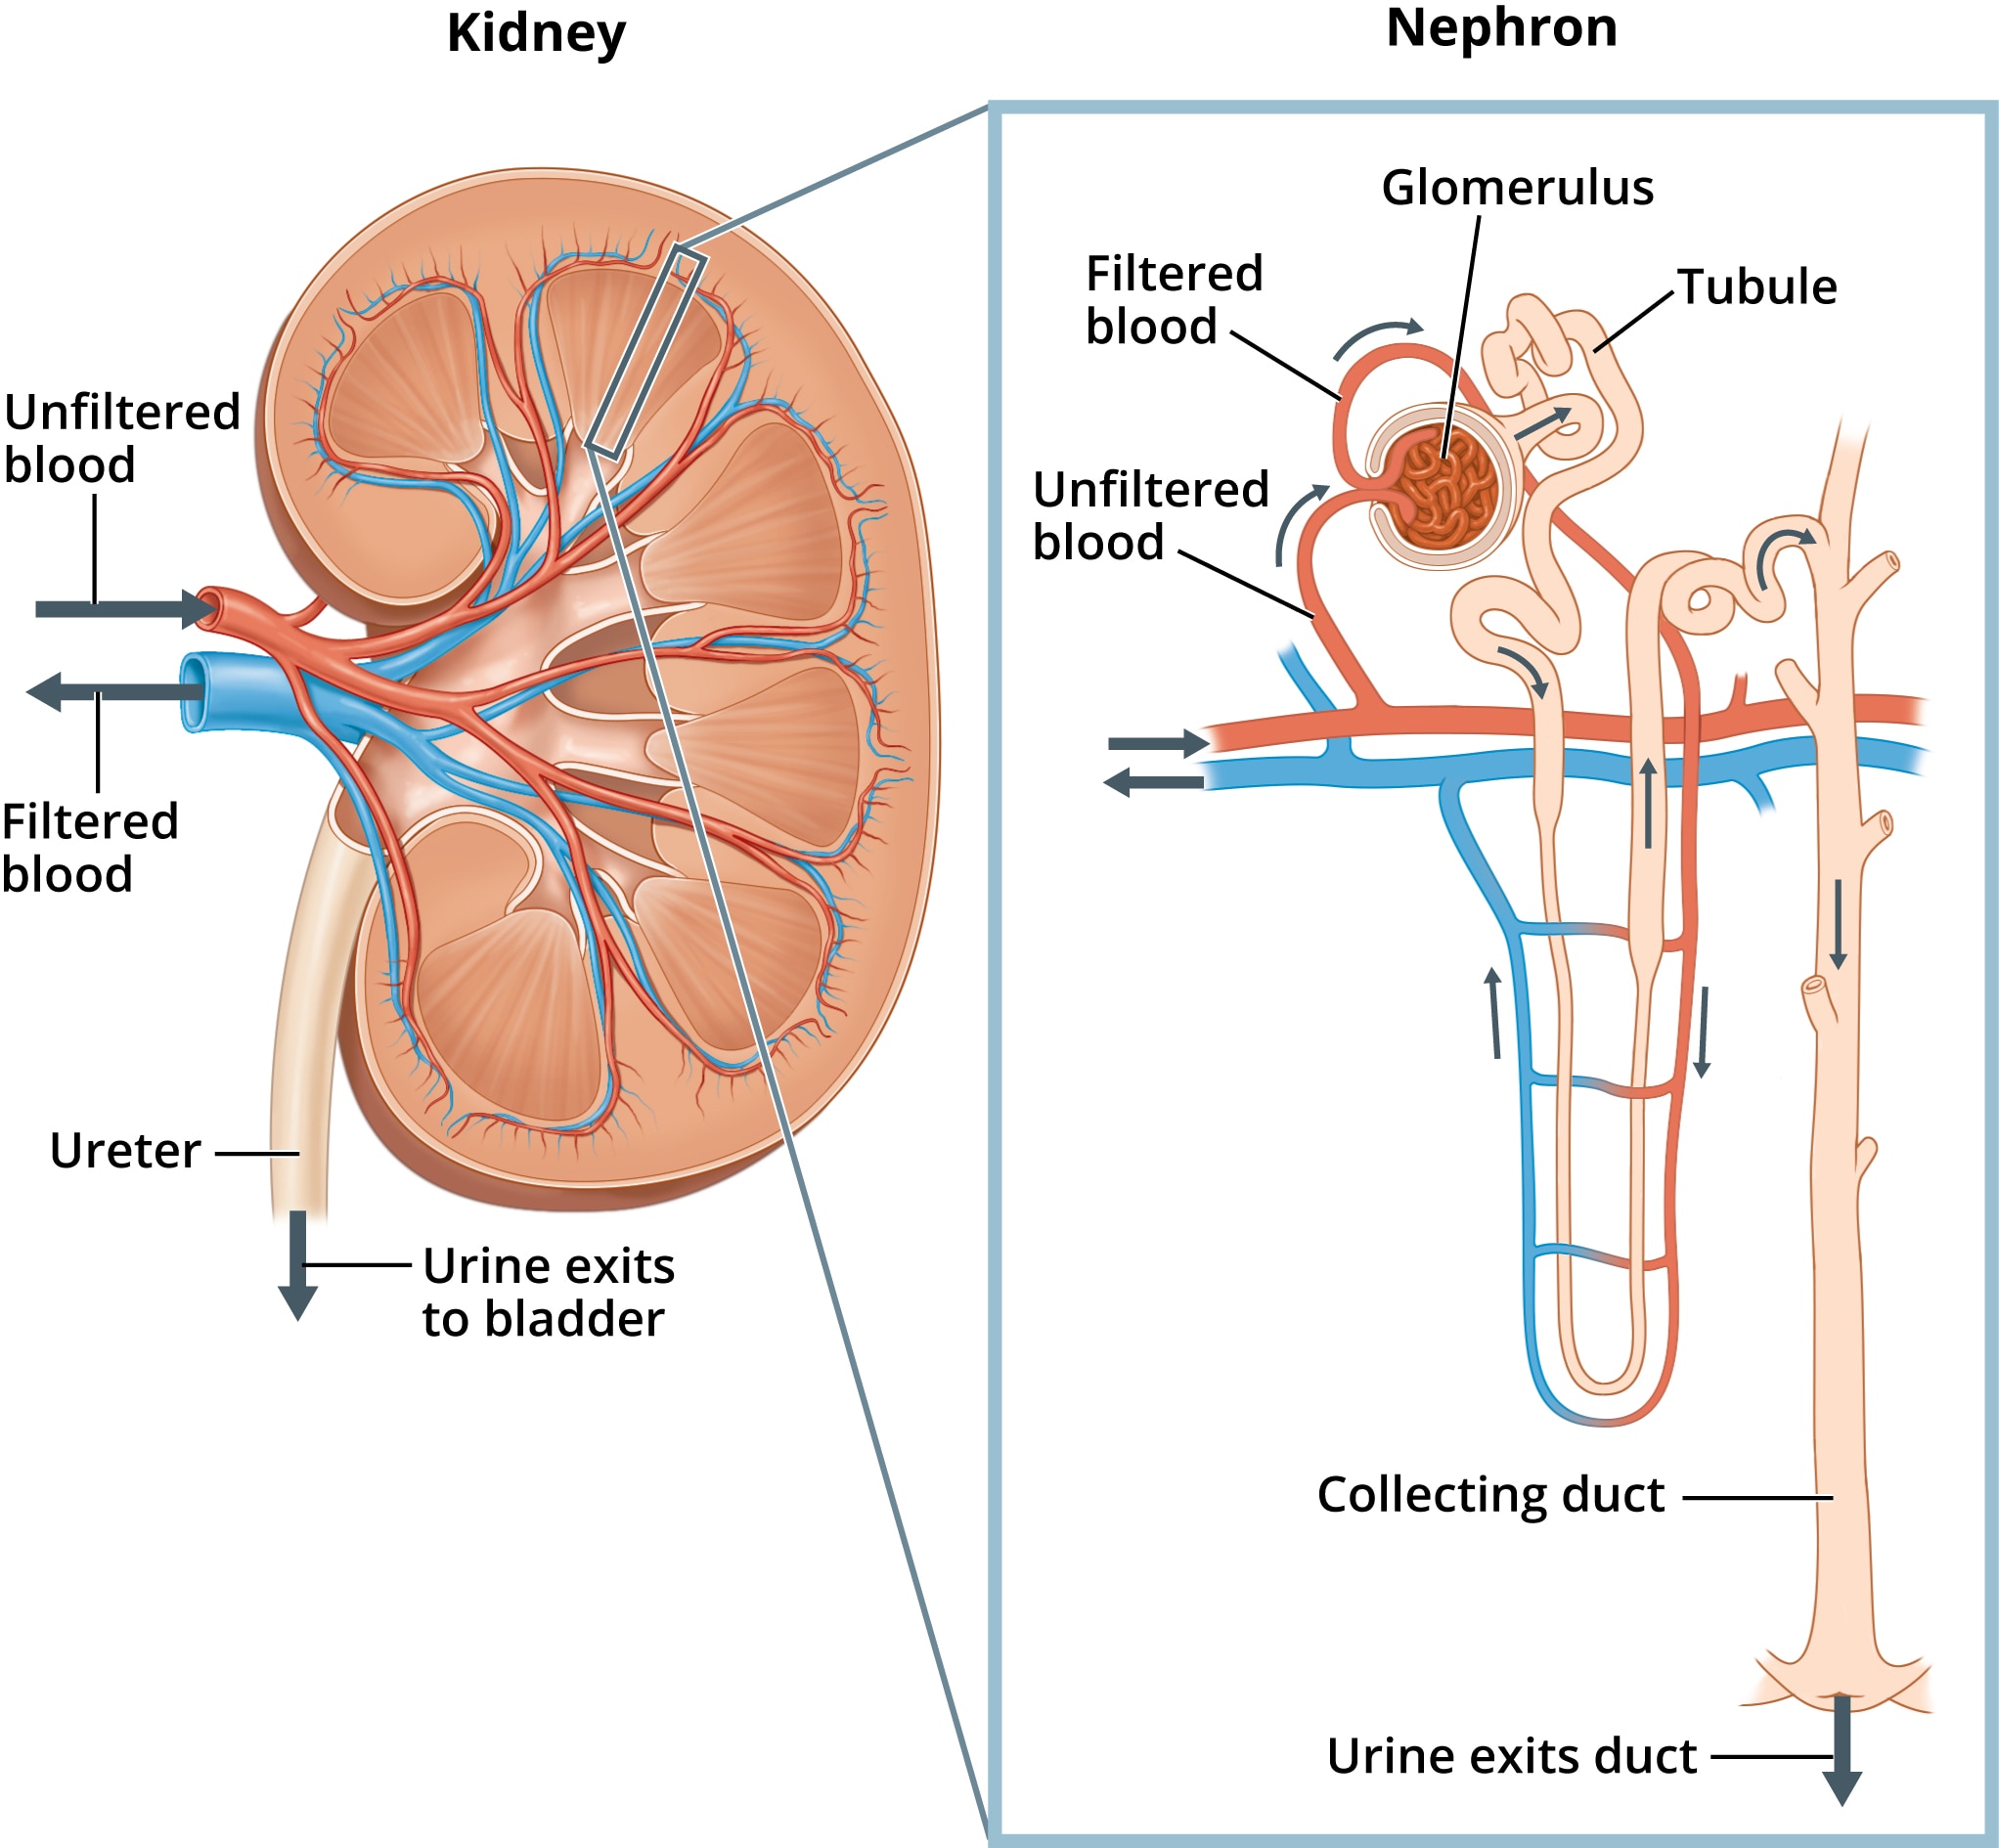 Kidney Nephron

 
   
 

Glomerulus
Filtered

 
 
  

Unfiltered
blood

      
   
   
 

Unfiltered

Urine exits
to bladder

  

Collecting duct

 

Urine exits duct 1